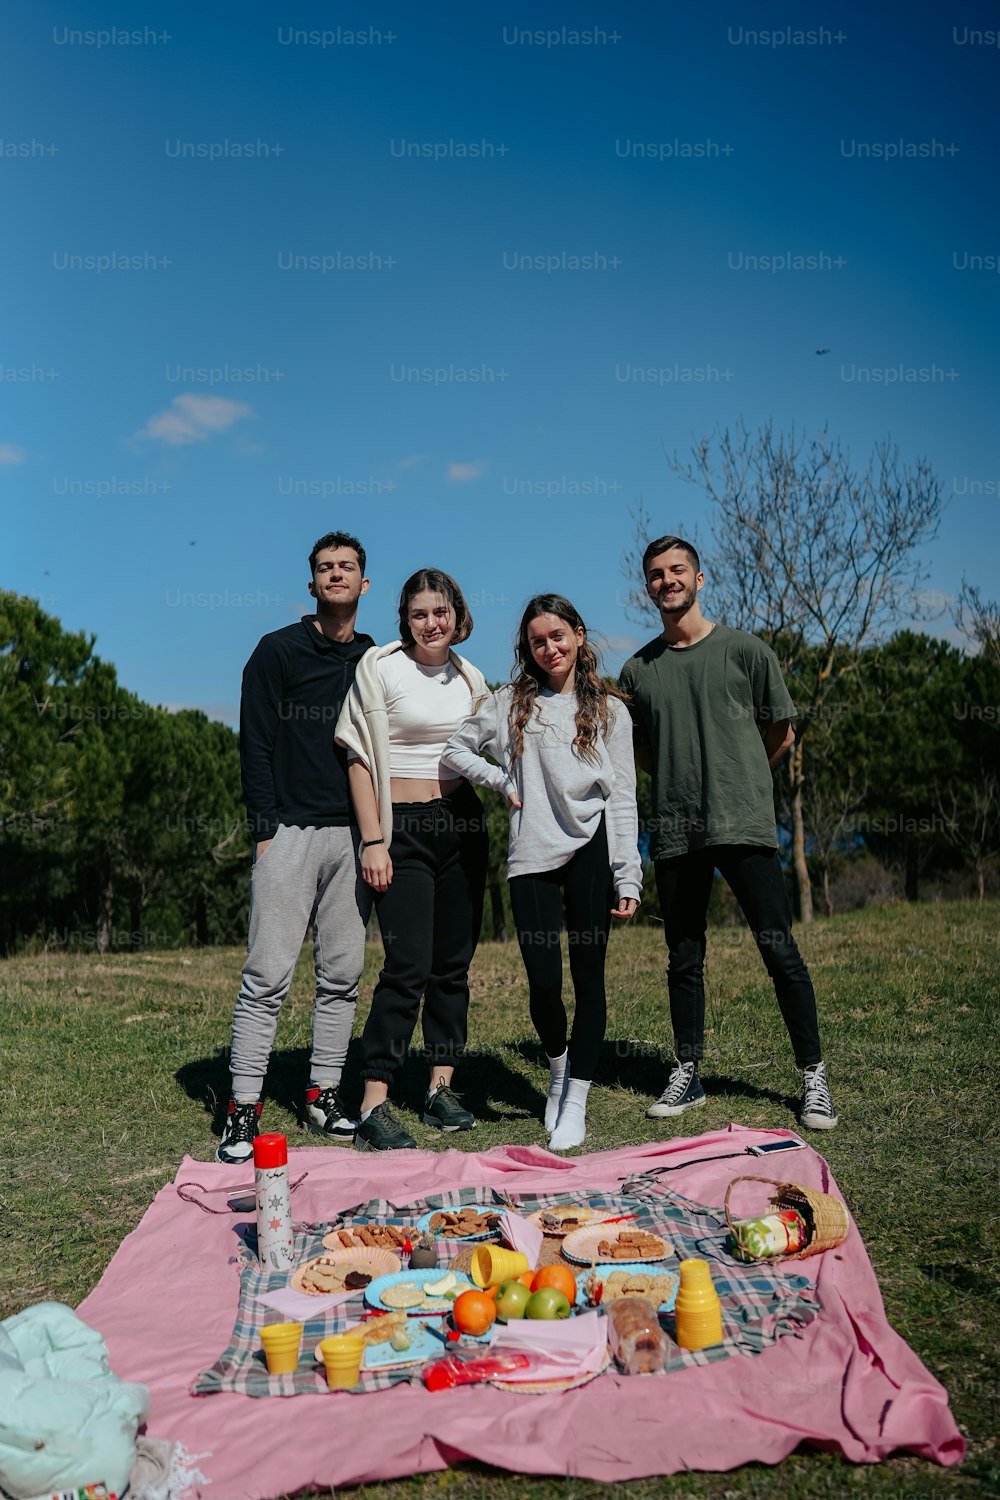 a group of people standing around a picnic blanket